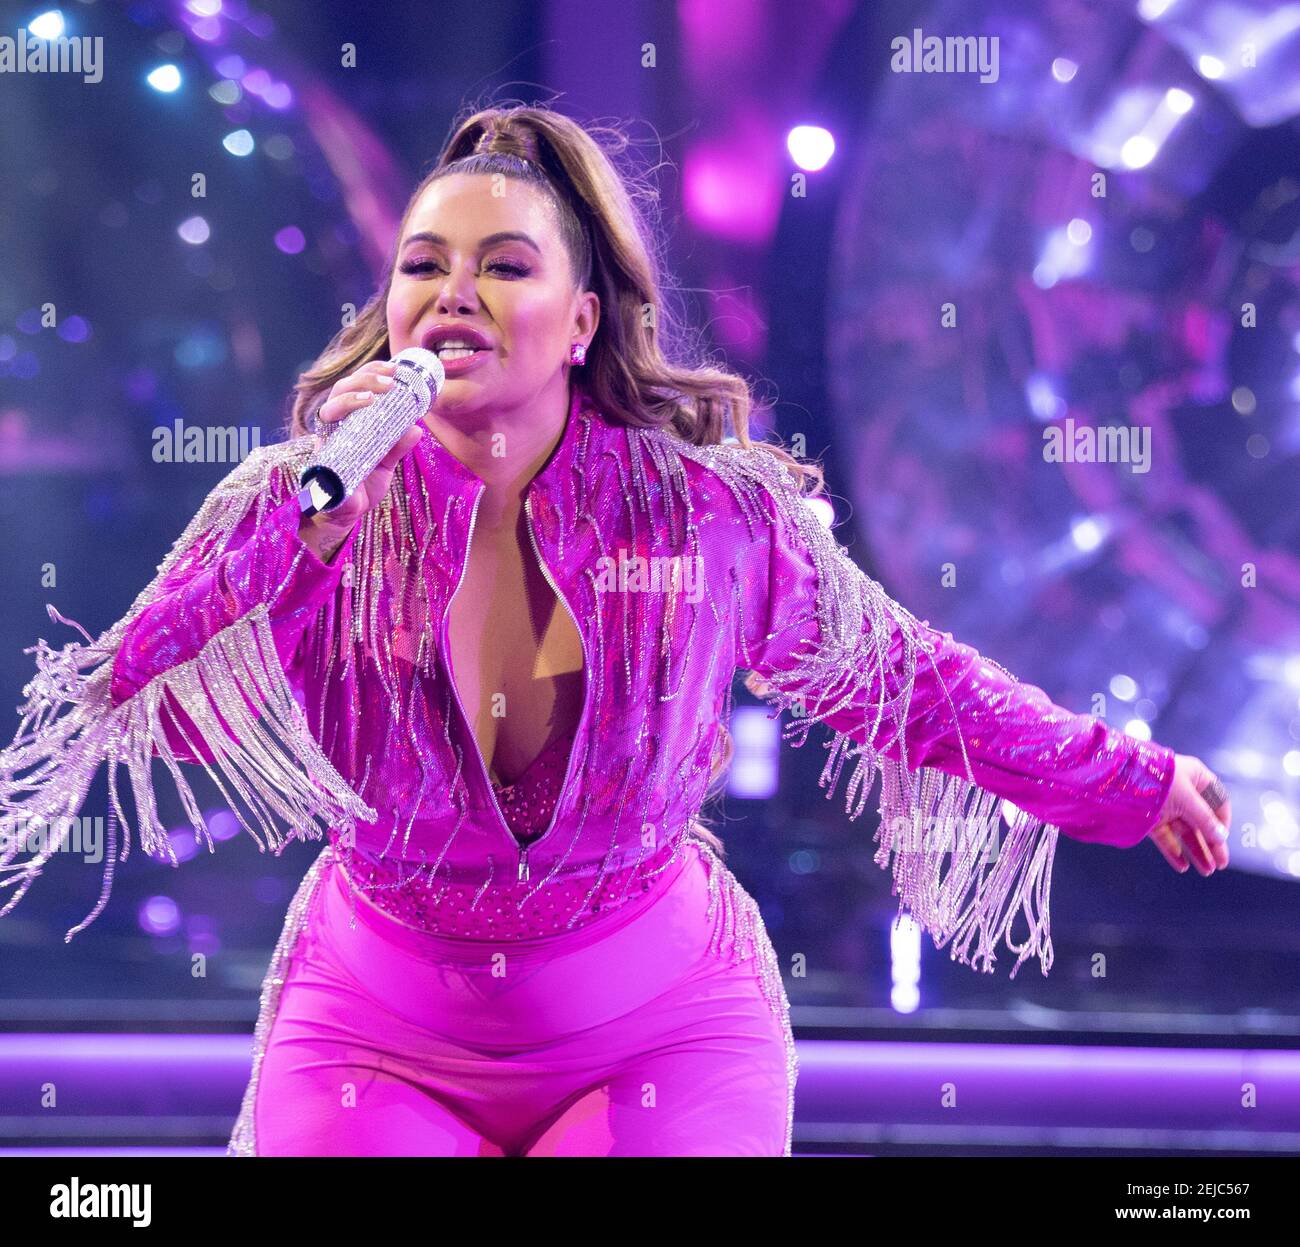 MIAMI, FL - JAN 19: Special guest Chiquis Rivera performs during